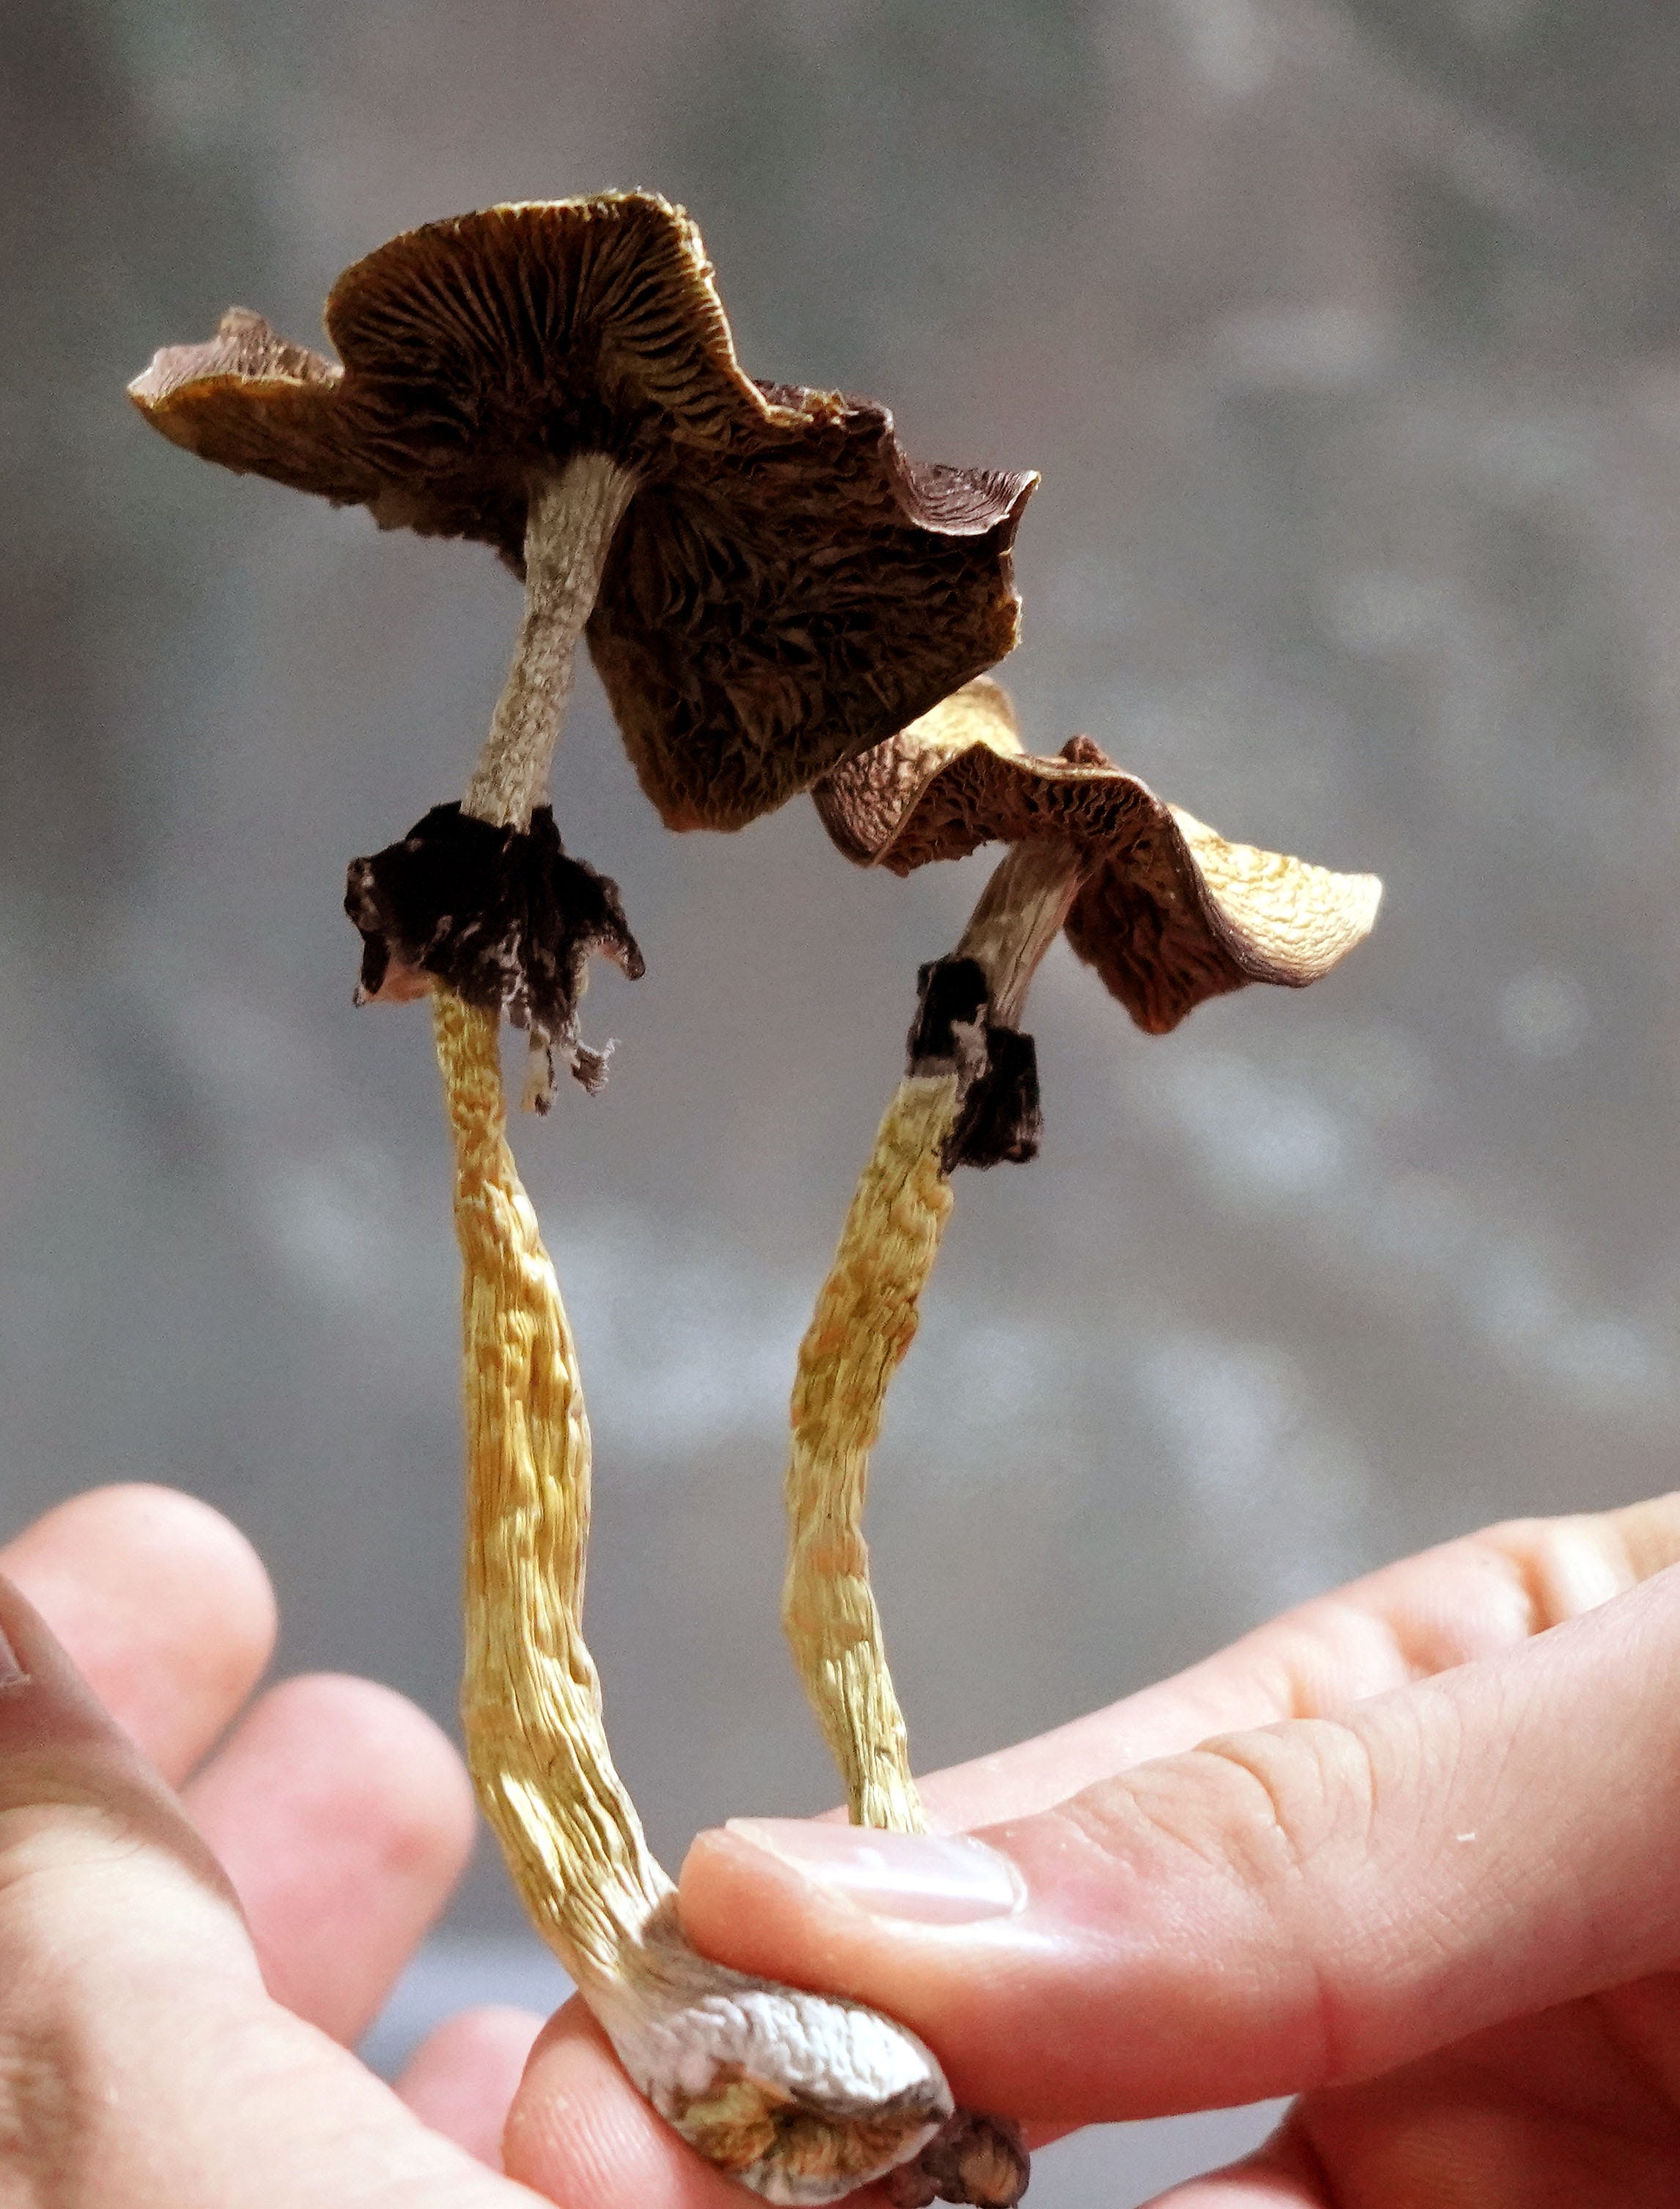 Getting Your Hands on Some Magic Mushrooms 178838 - Getting Your Hands on Some Magic Mushrooms!